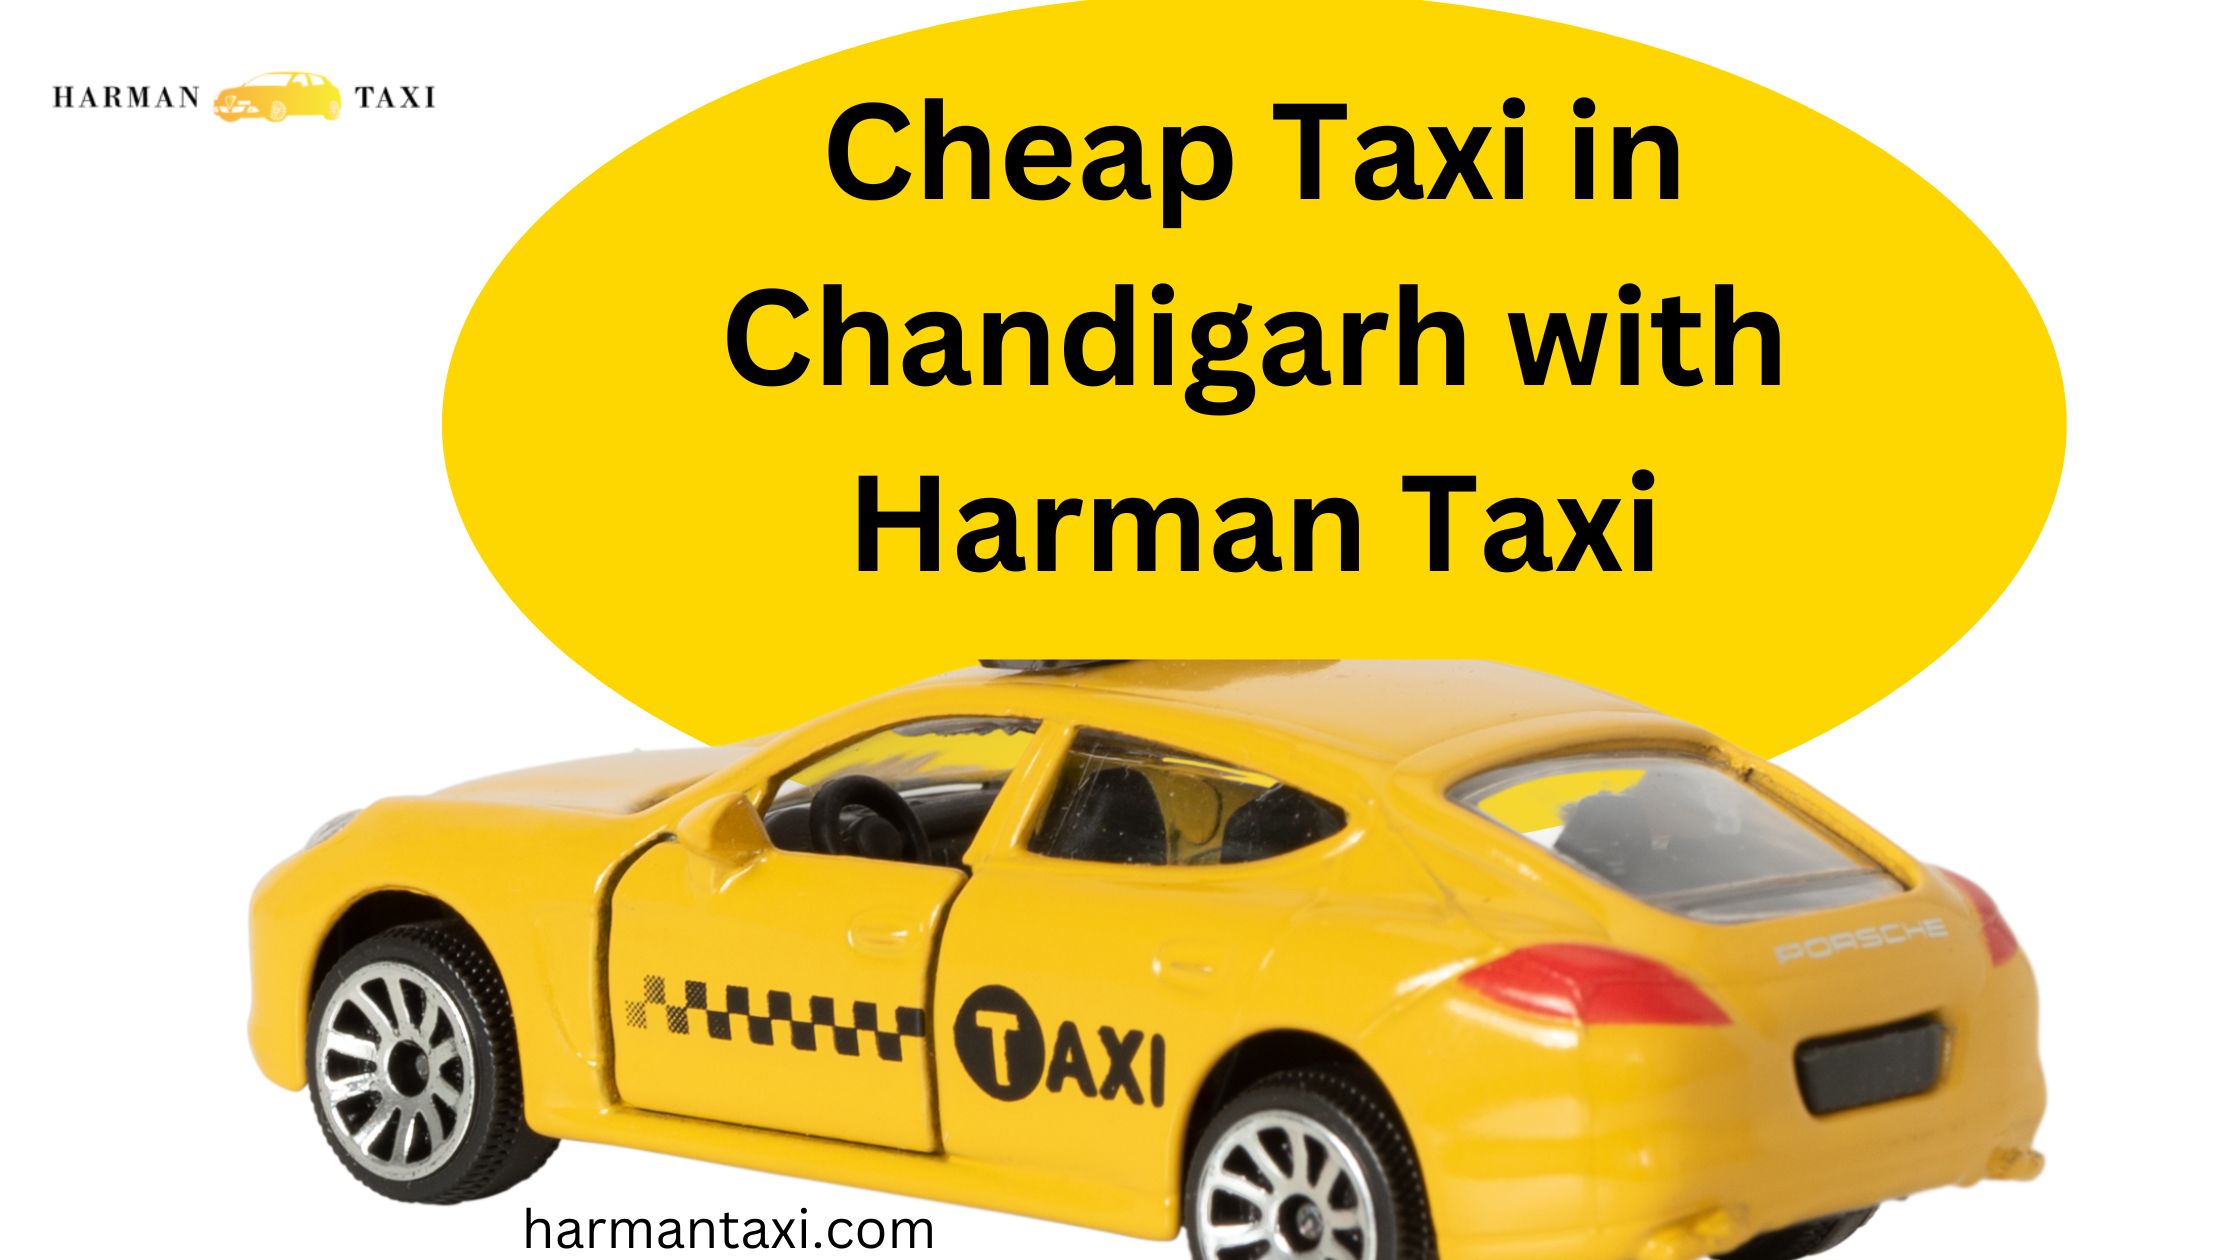 Cheap Taxi in Chandigarh with Harman Taxi